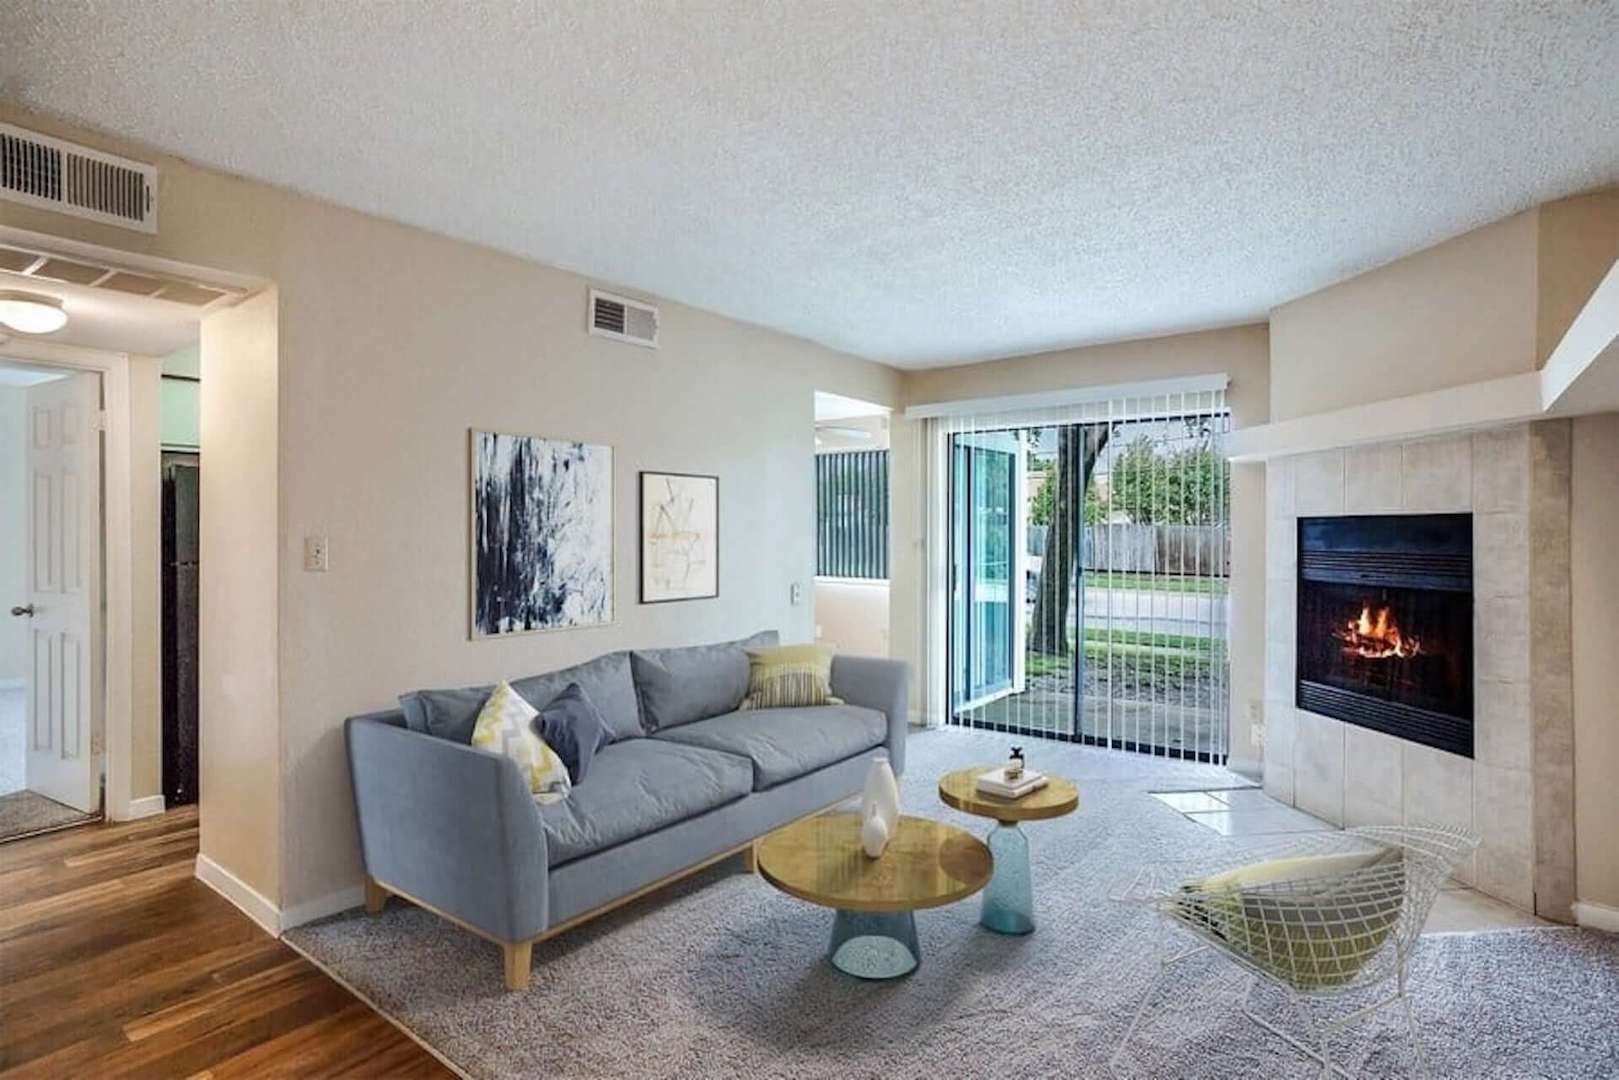 Living room with fireplace and exit to patio